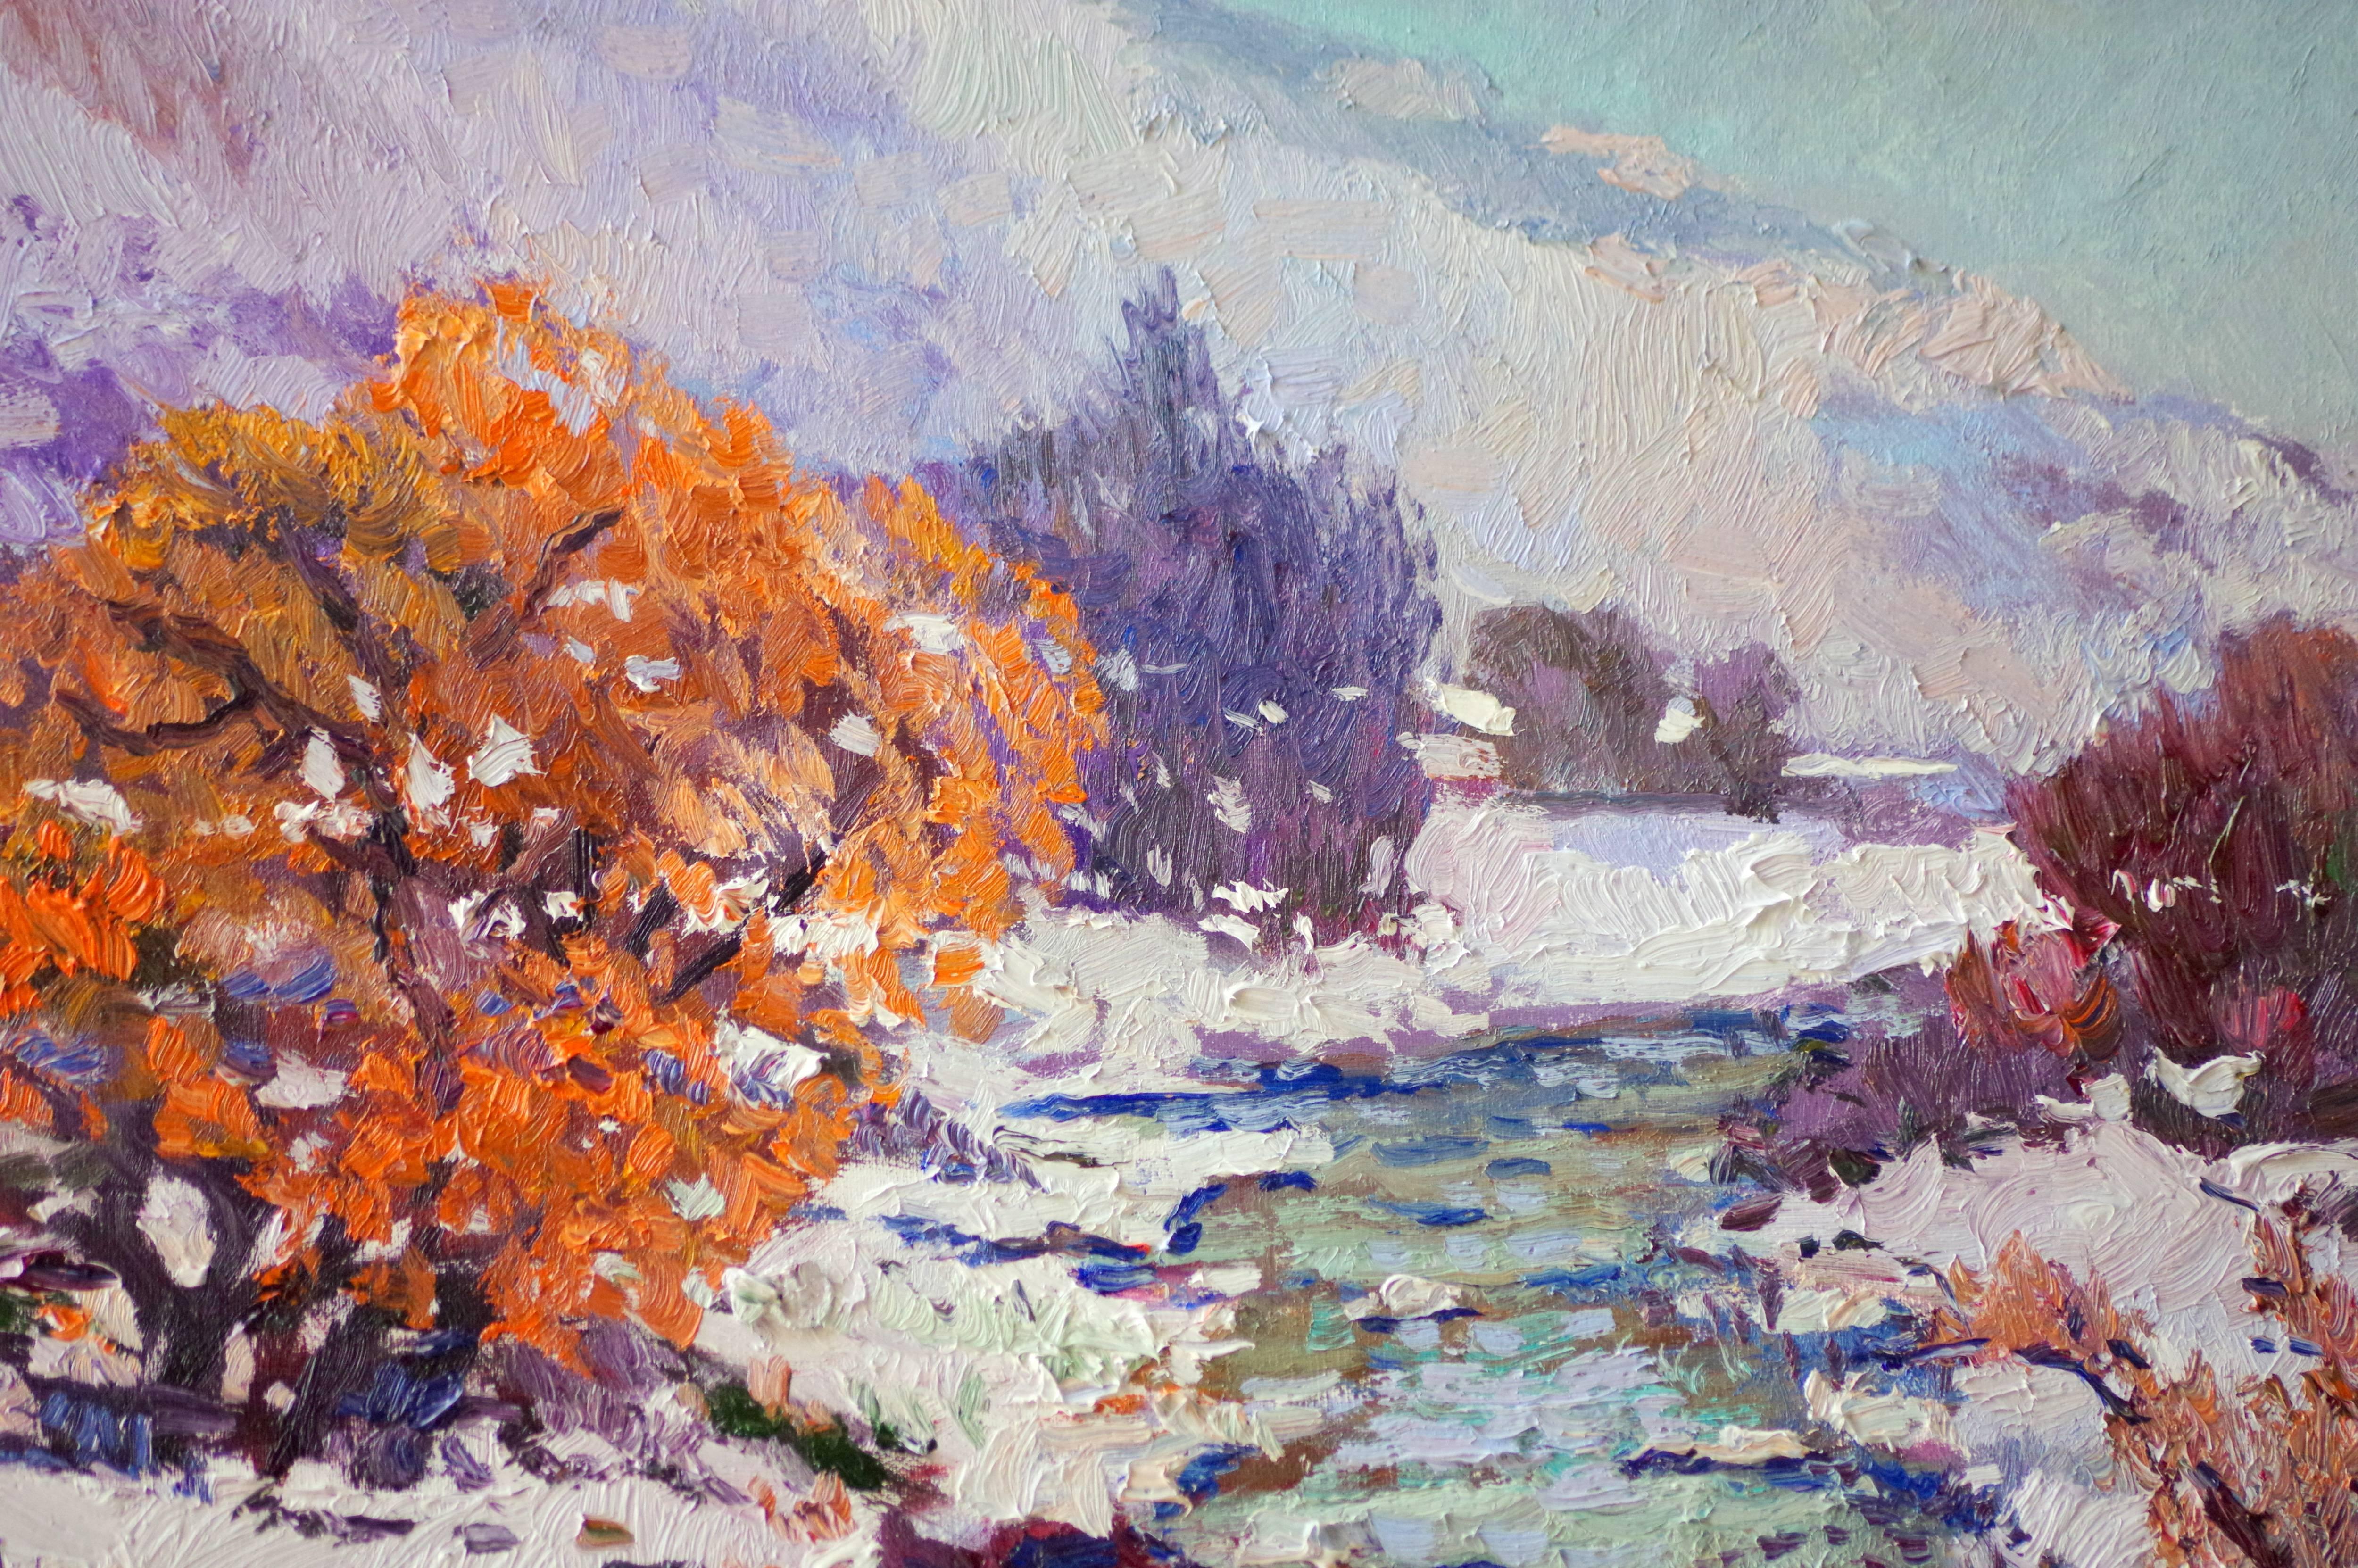 Winter Landscape with Orange Tree - Painting by Suren Nersisyan